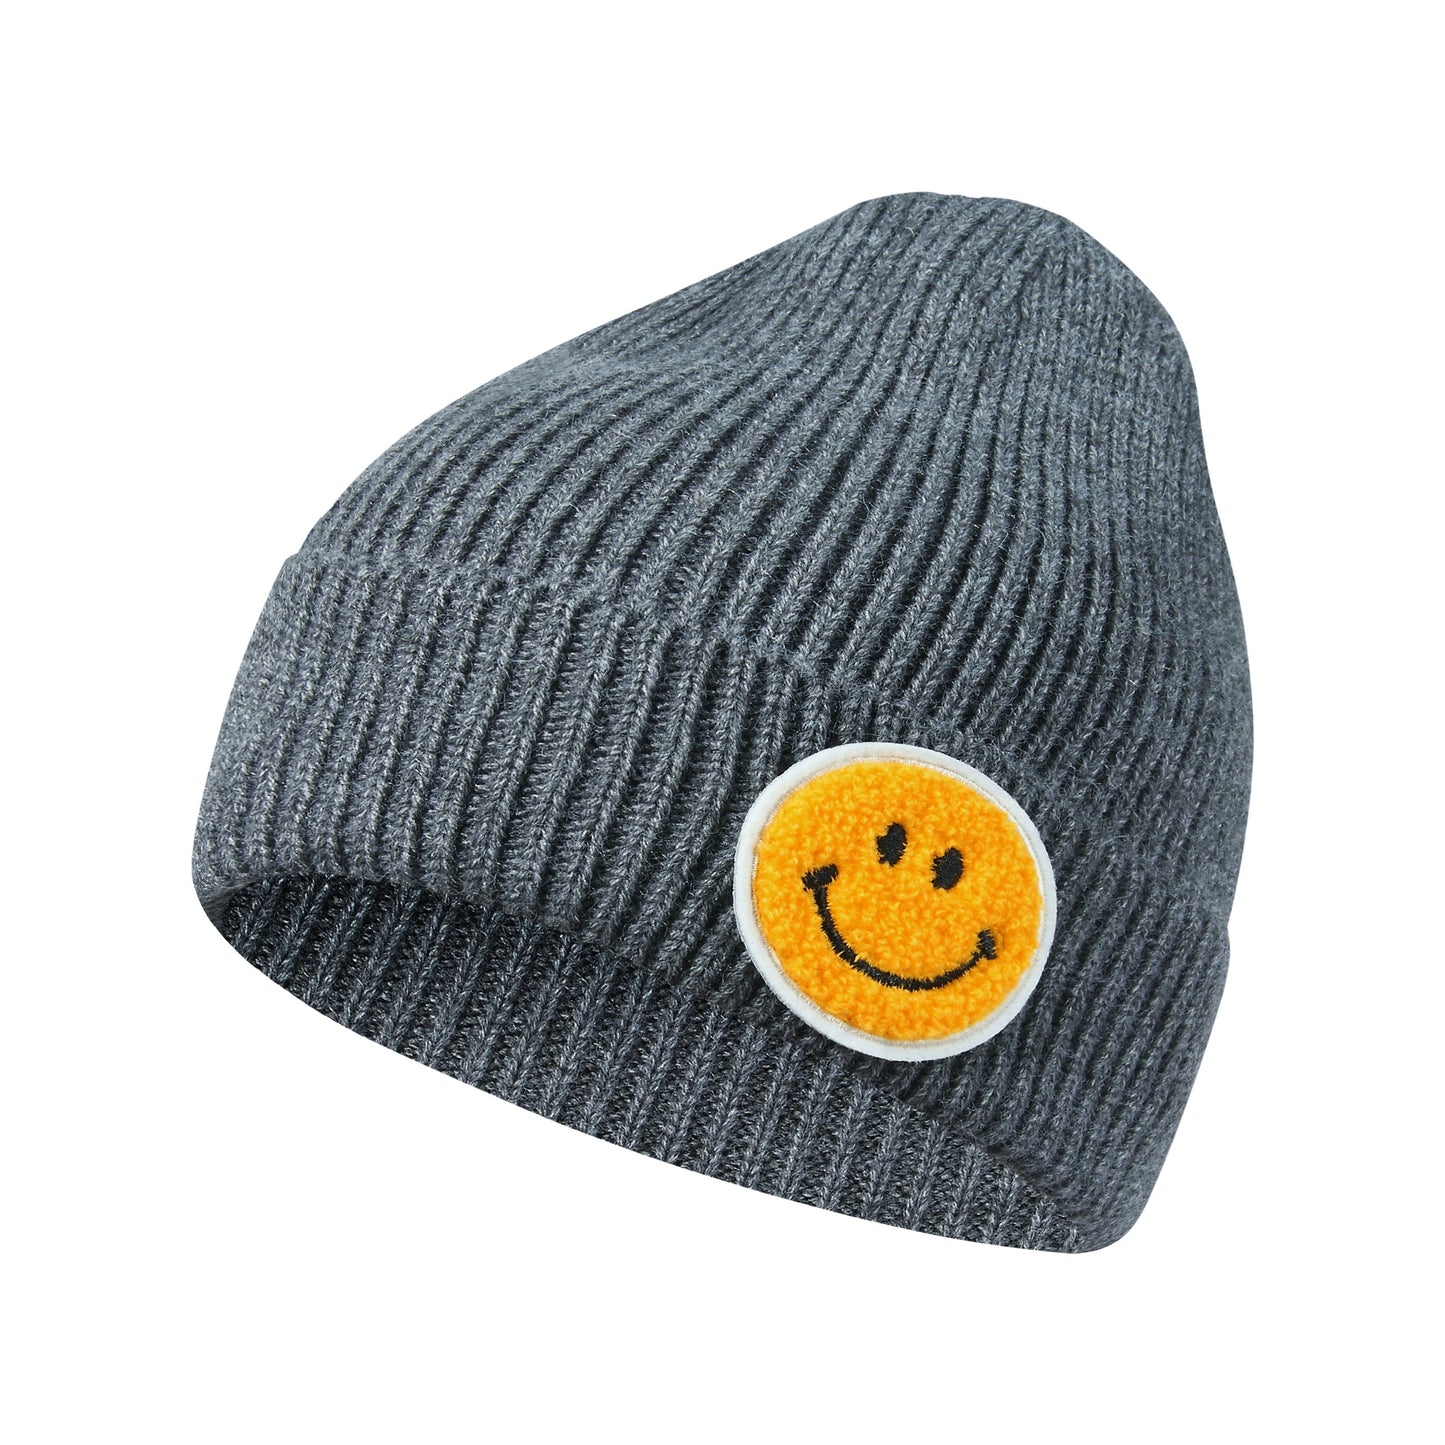 Casual Pastel Tones Yellow Smile Happy Face Beanie